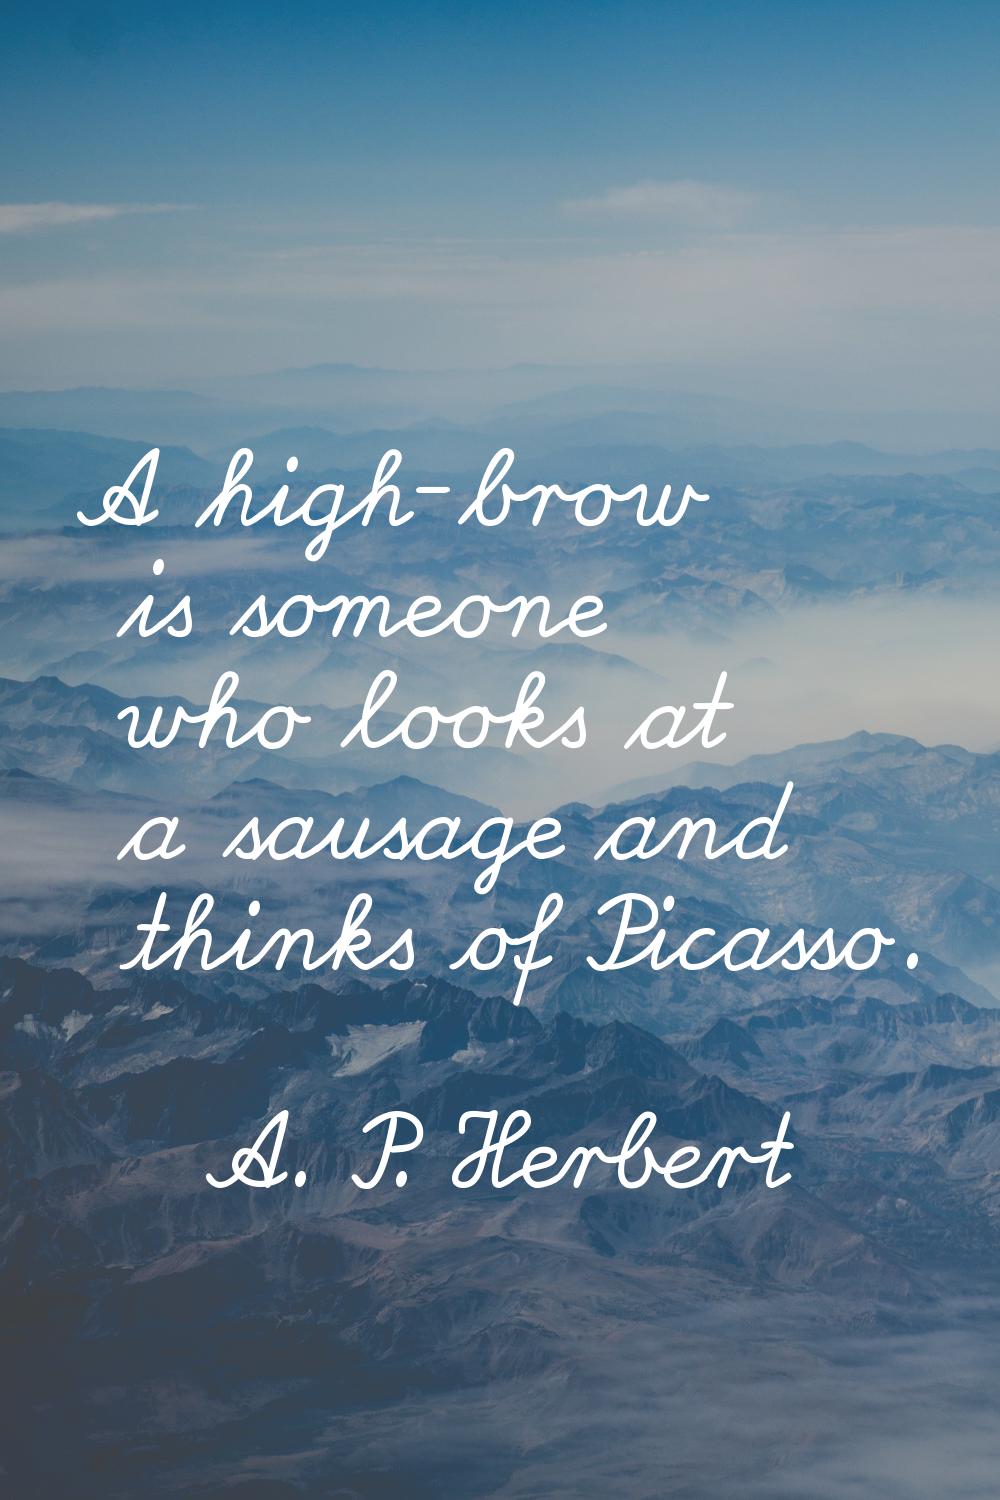 A high-brow is someone who looks at a sausage and thinks of Picasso.